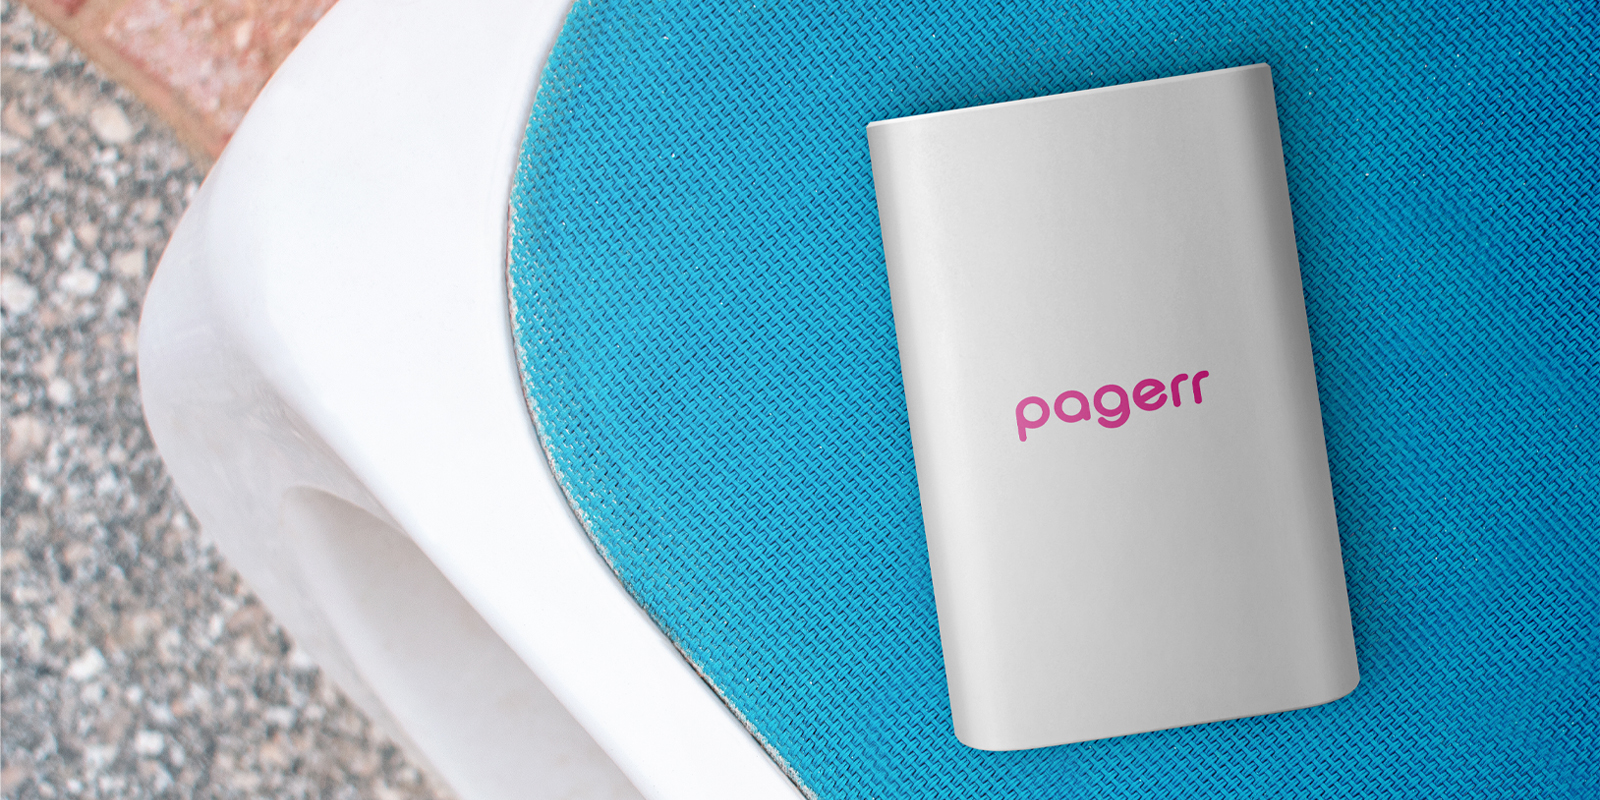 Chargers & power banks in Bendigo - Print with Pagerr